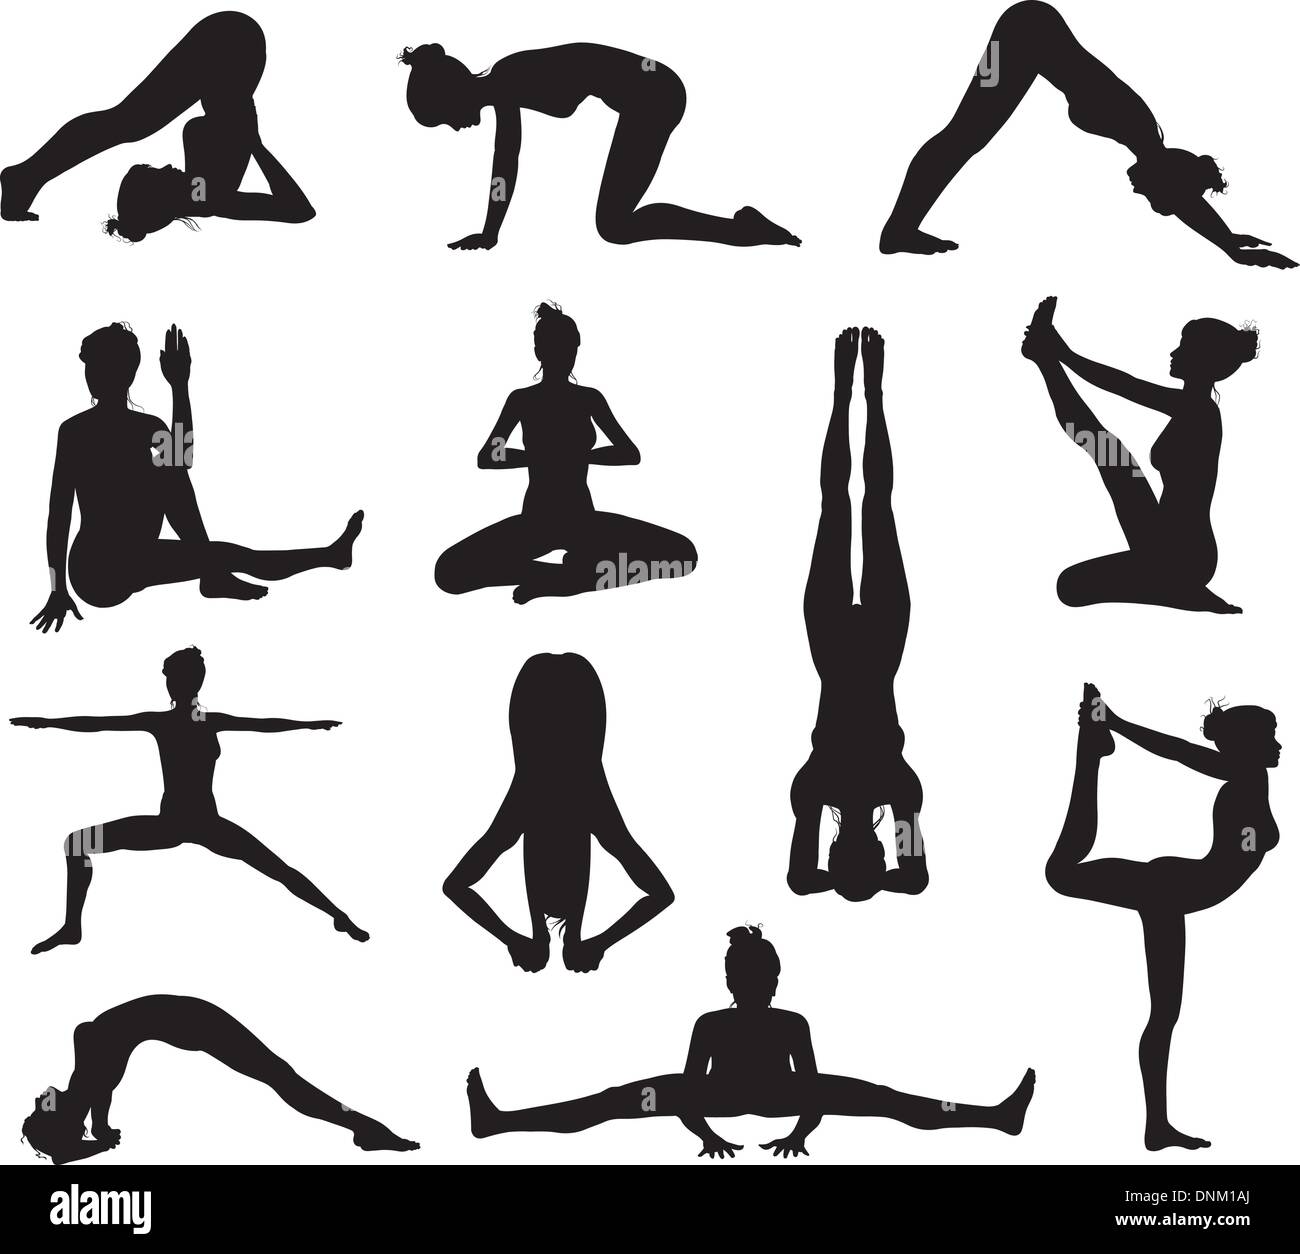 a set of highly detailed high quality yoga or pilates pose silhouettes DNM1AJ